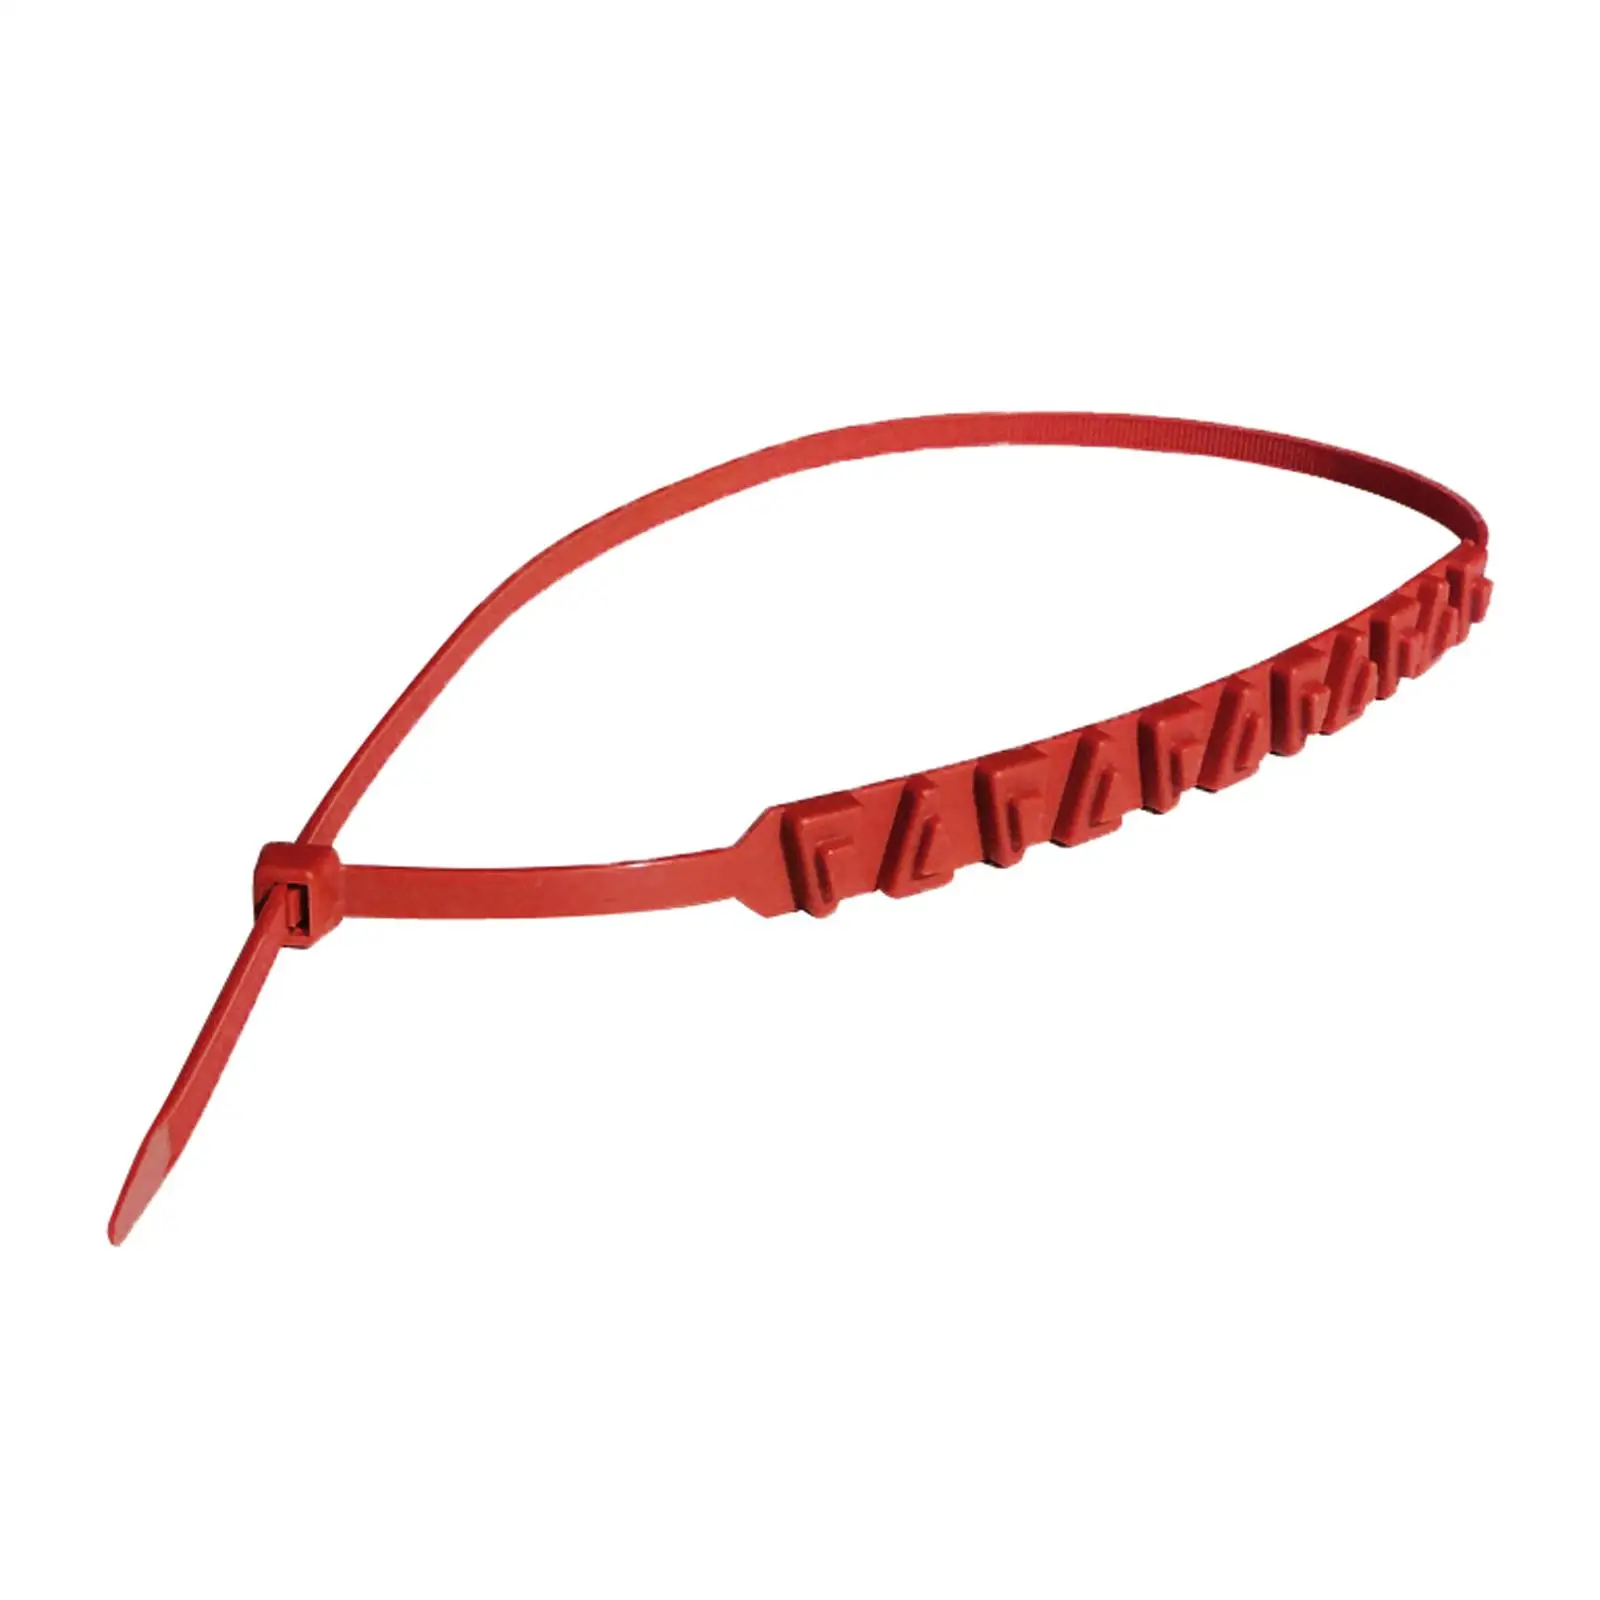  Strips for Tires Survival Set of 10 Pcs Accessories Red Portable Winter Driving Tire Cable Belts Fit for Trip Pickup Trucks